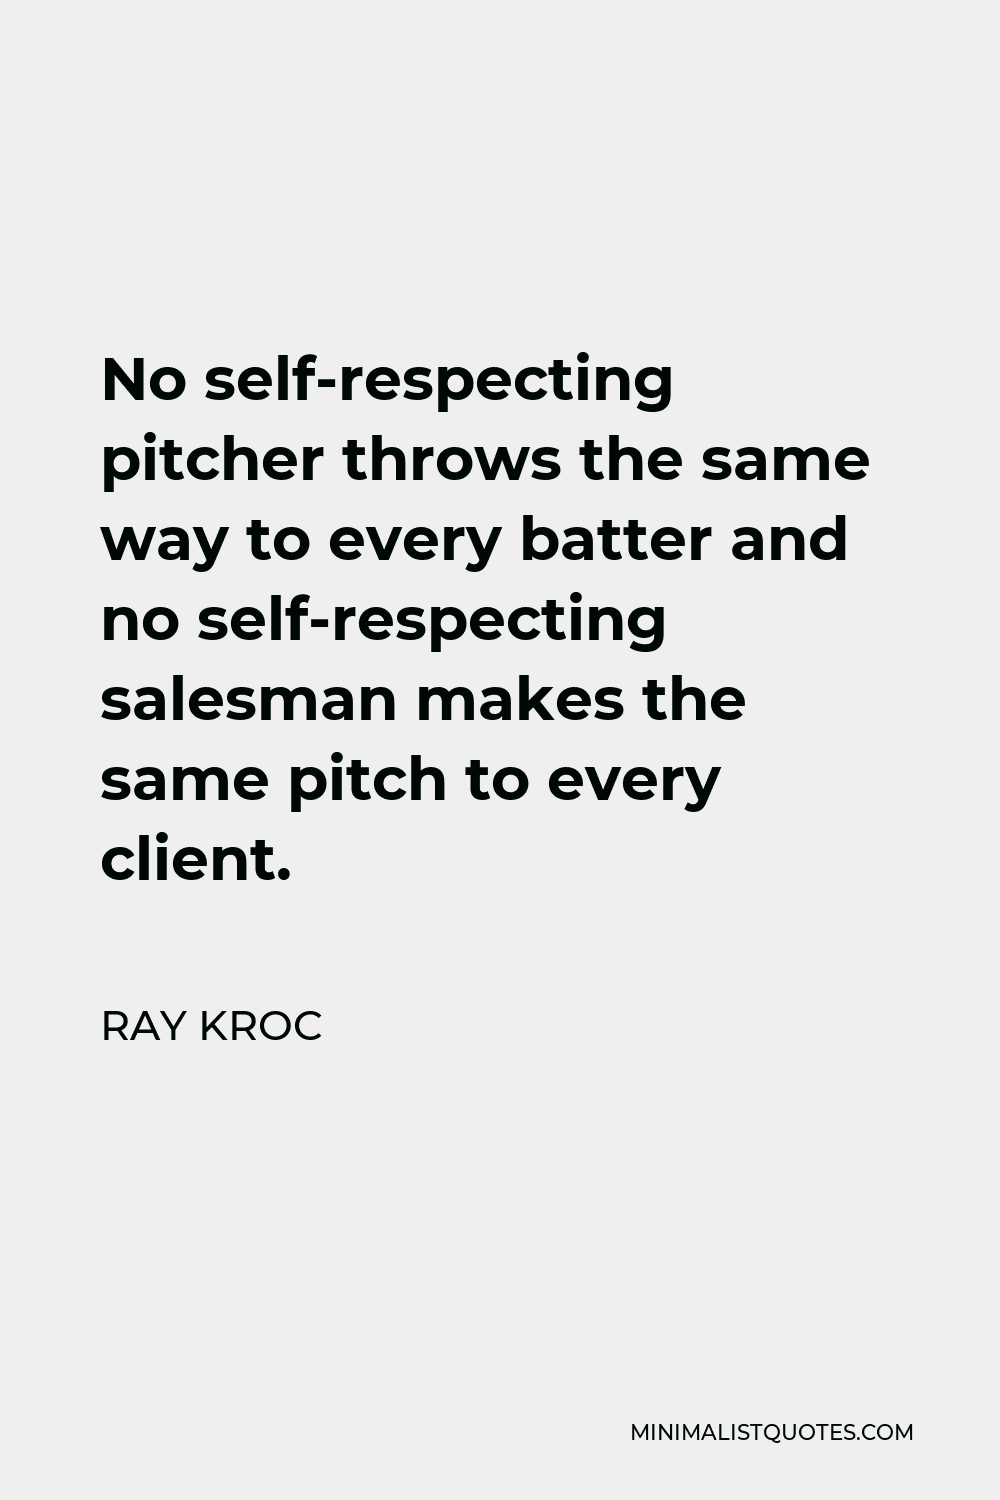 Ray Kroc Quote - No self-respecting pitcher throws the same way to every batter and no self-respecting salesman makes the same pitch to every client.